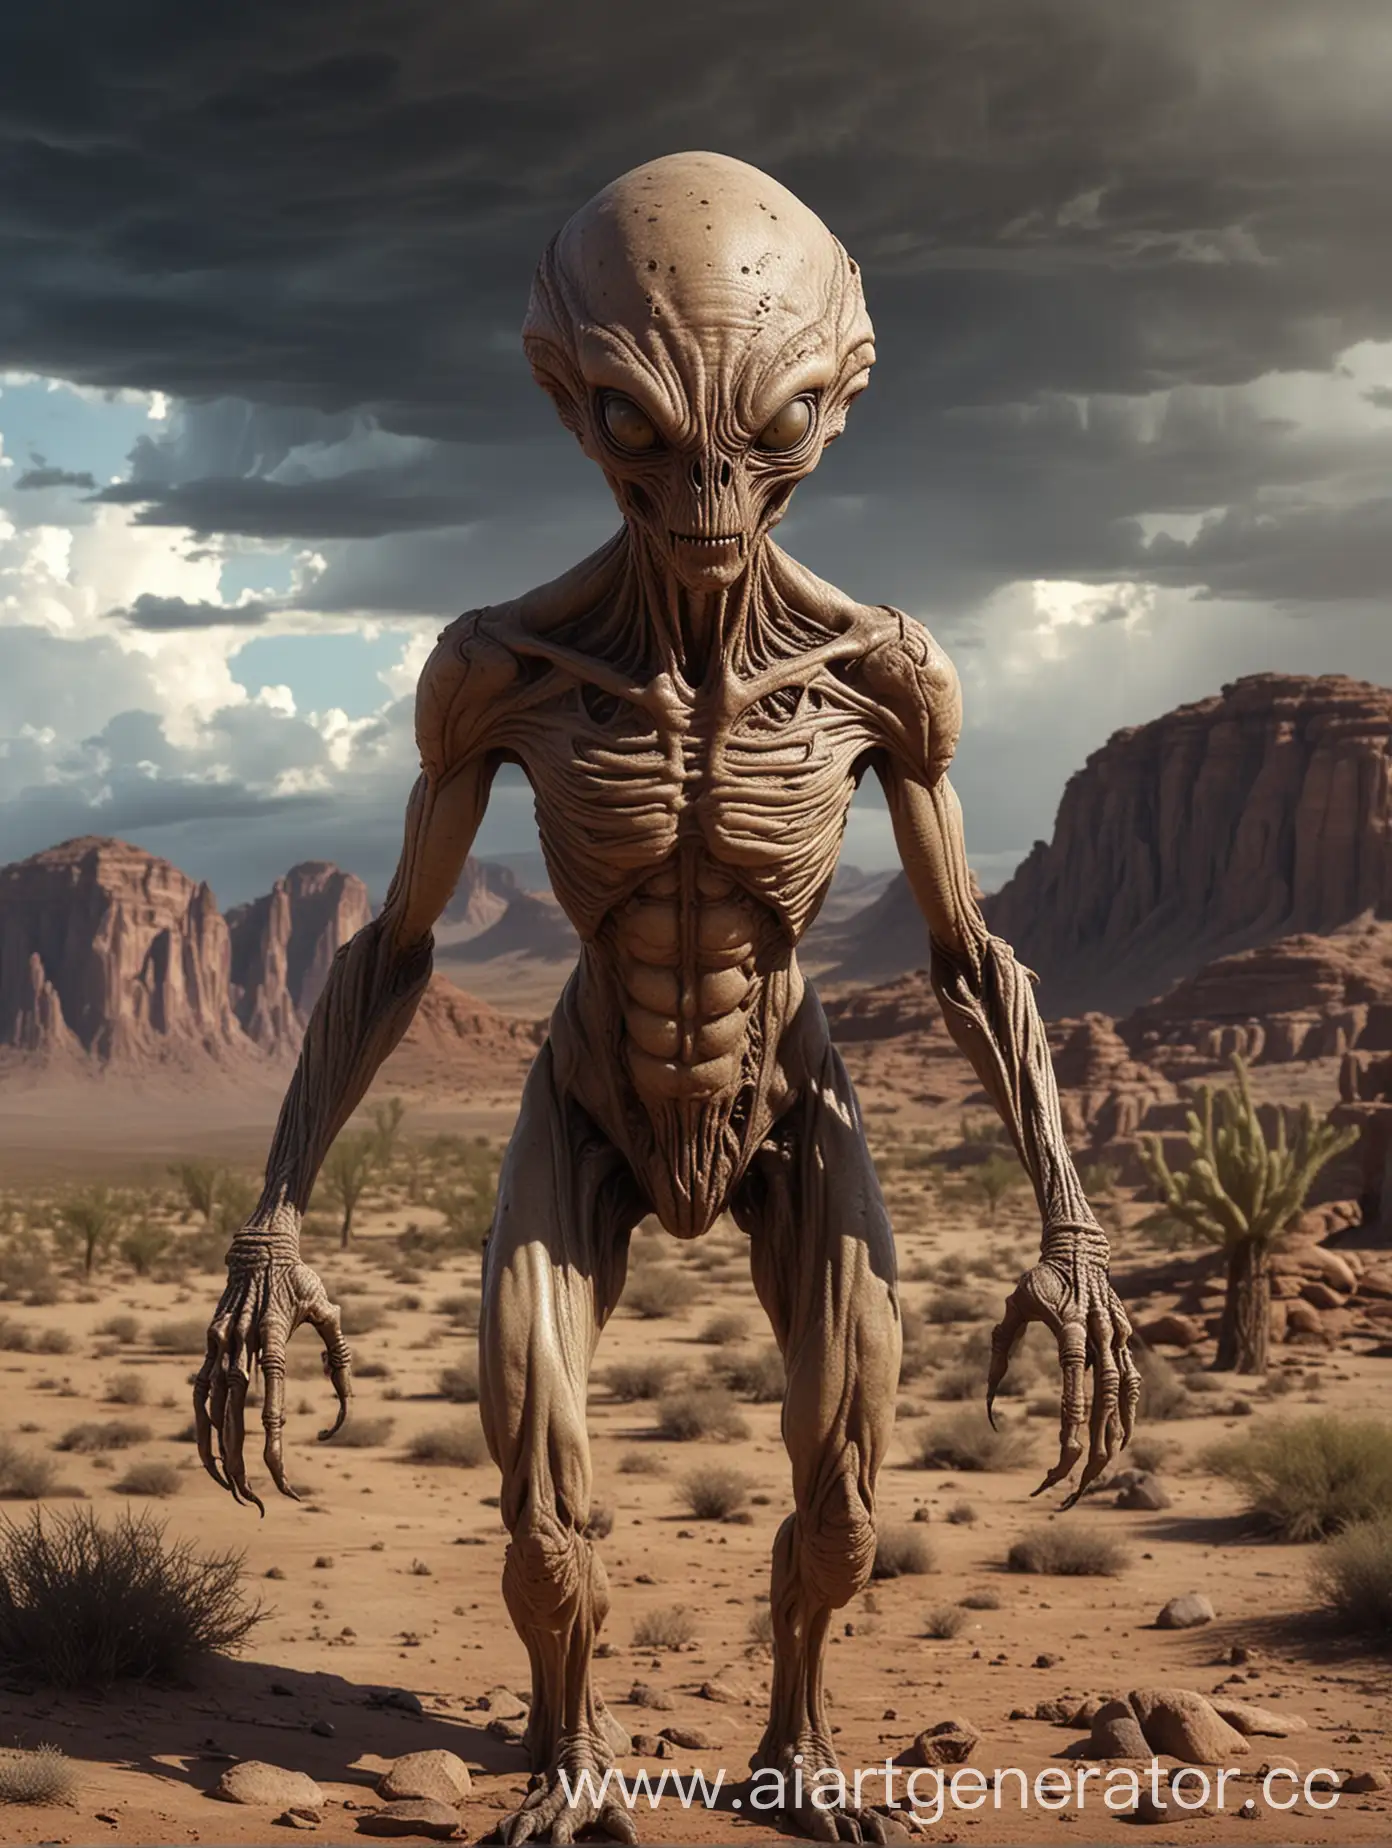 an alien creature with all its organs visible, it is very unusual. He must have a crazy appearance. There is a desert alien landscape with a storm in the background.